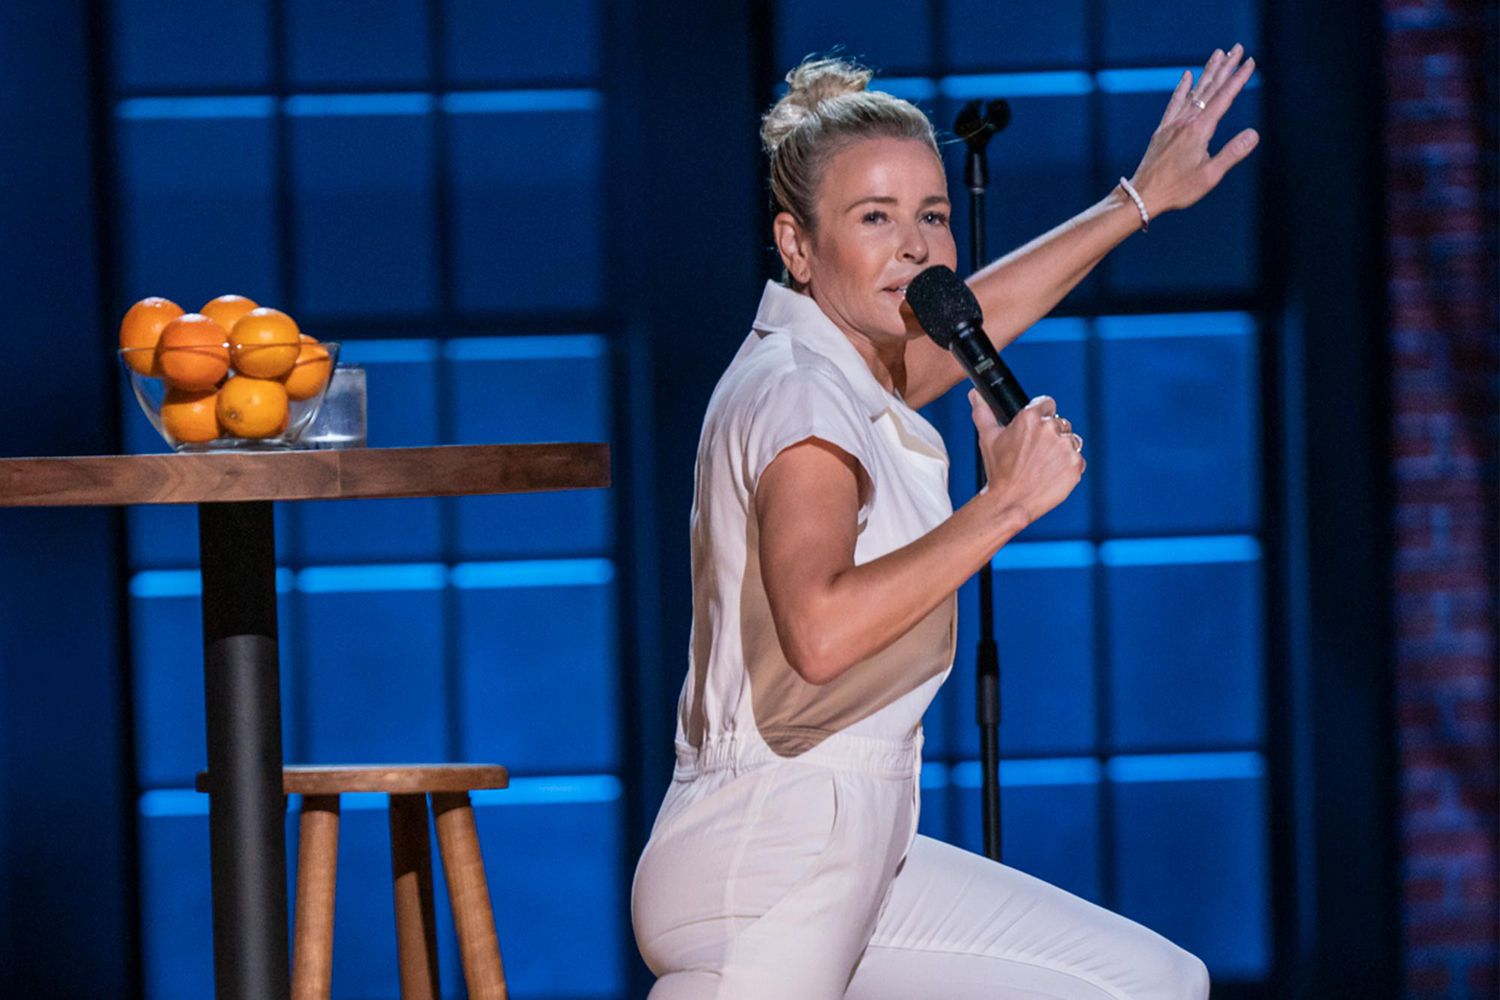 Chelsea Handler 2020 - Chelsea Handler On Hbo Max Special Evolution Brother S Death Ew Com / Handler responded by twisting herself in knots to explain how the president is not responsible for the pardons and commutations that only he.